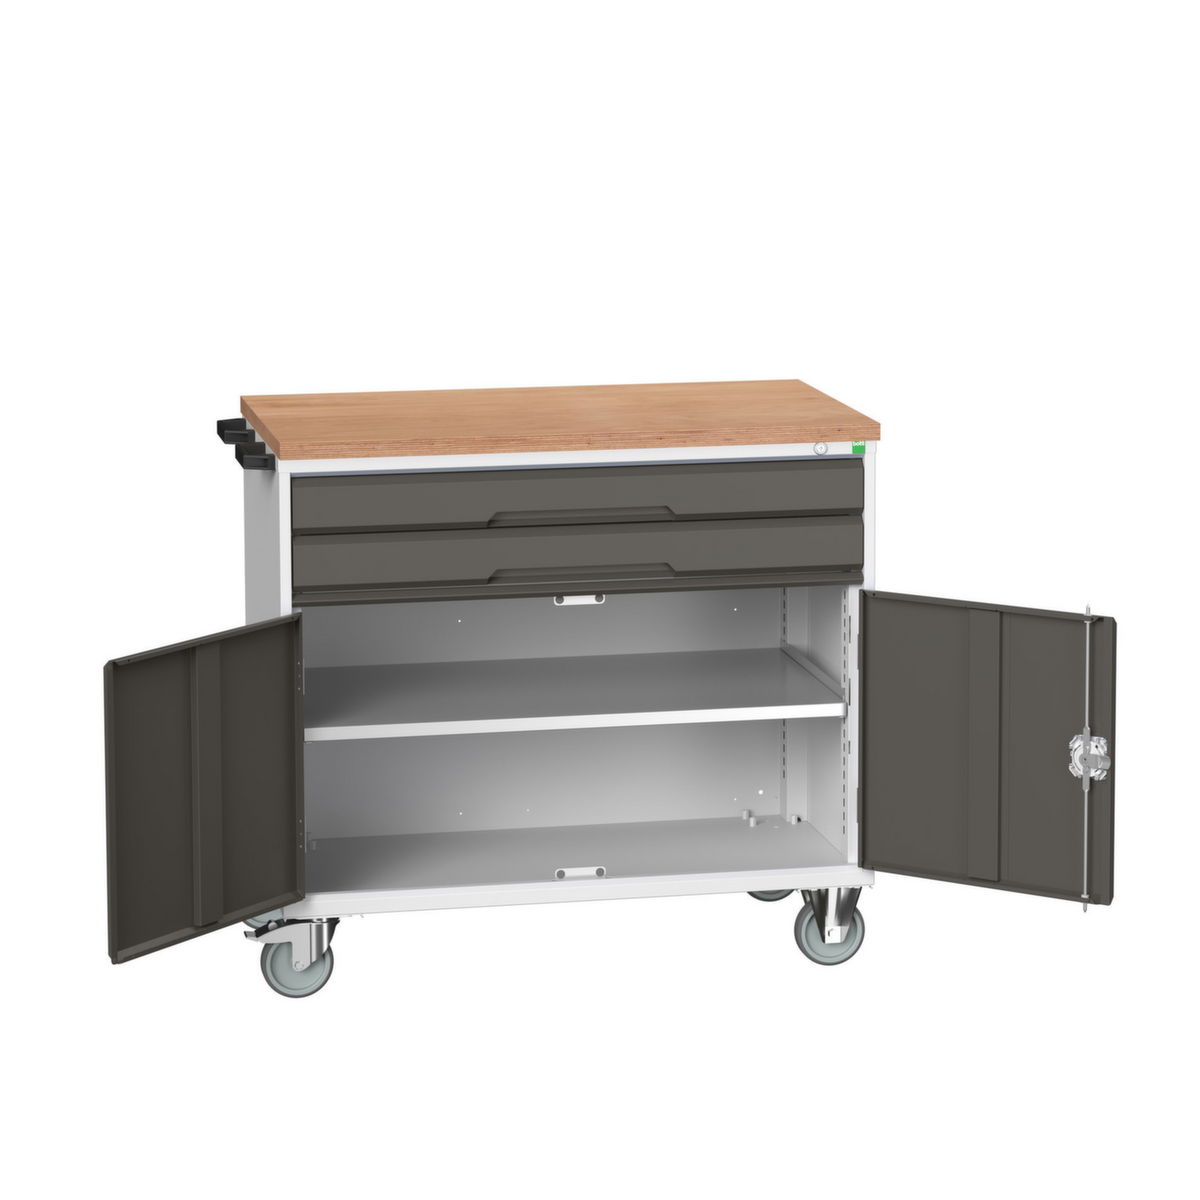 bott Chariot à outils verso, 2 tiroirs, 1 armoire, RAL7035 gris clair/RAL7016 gris anthracite